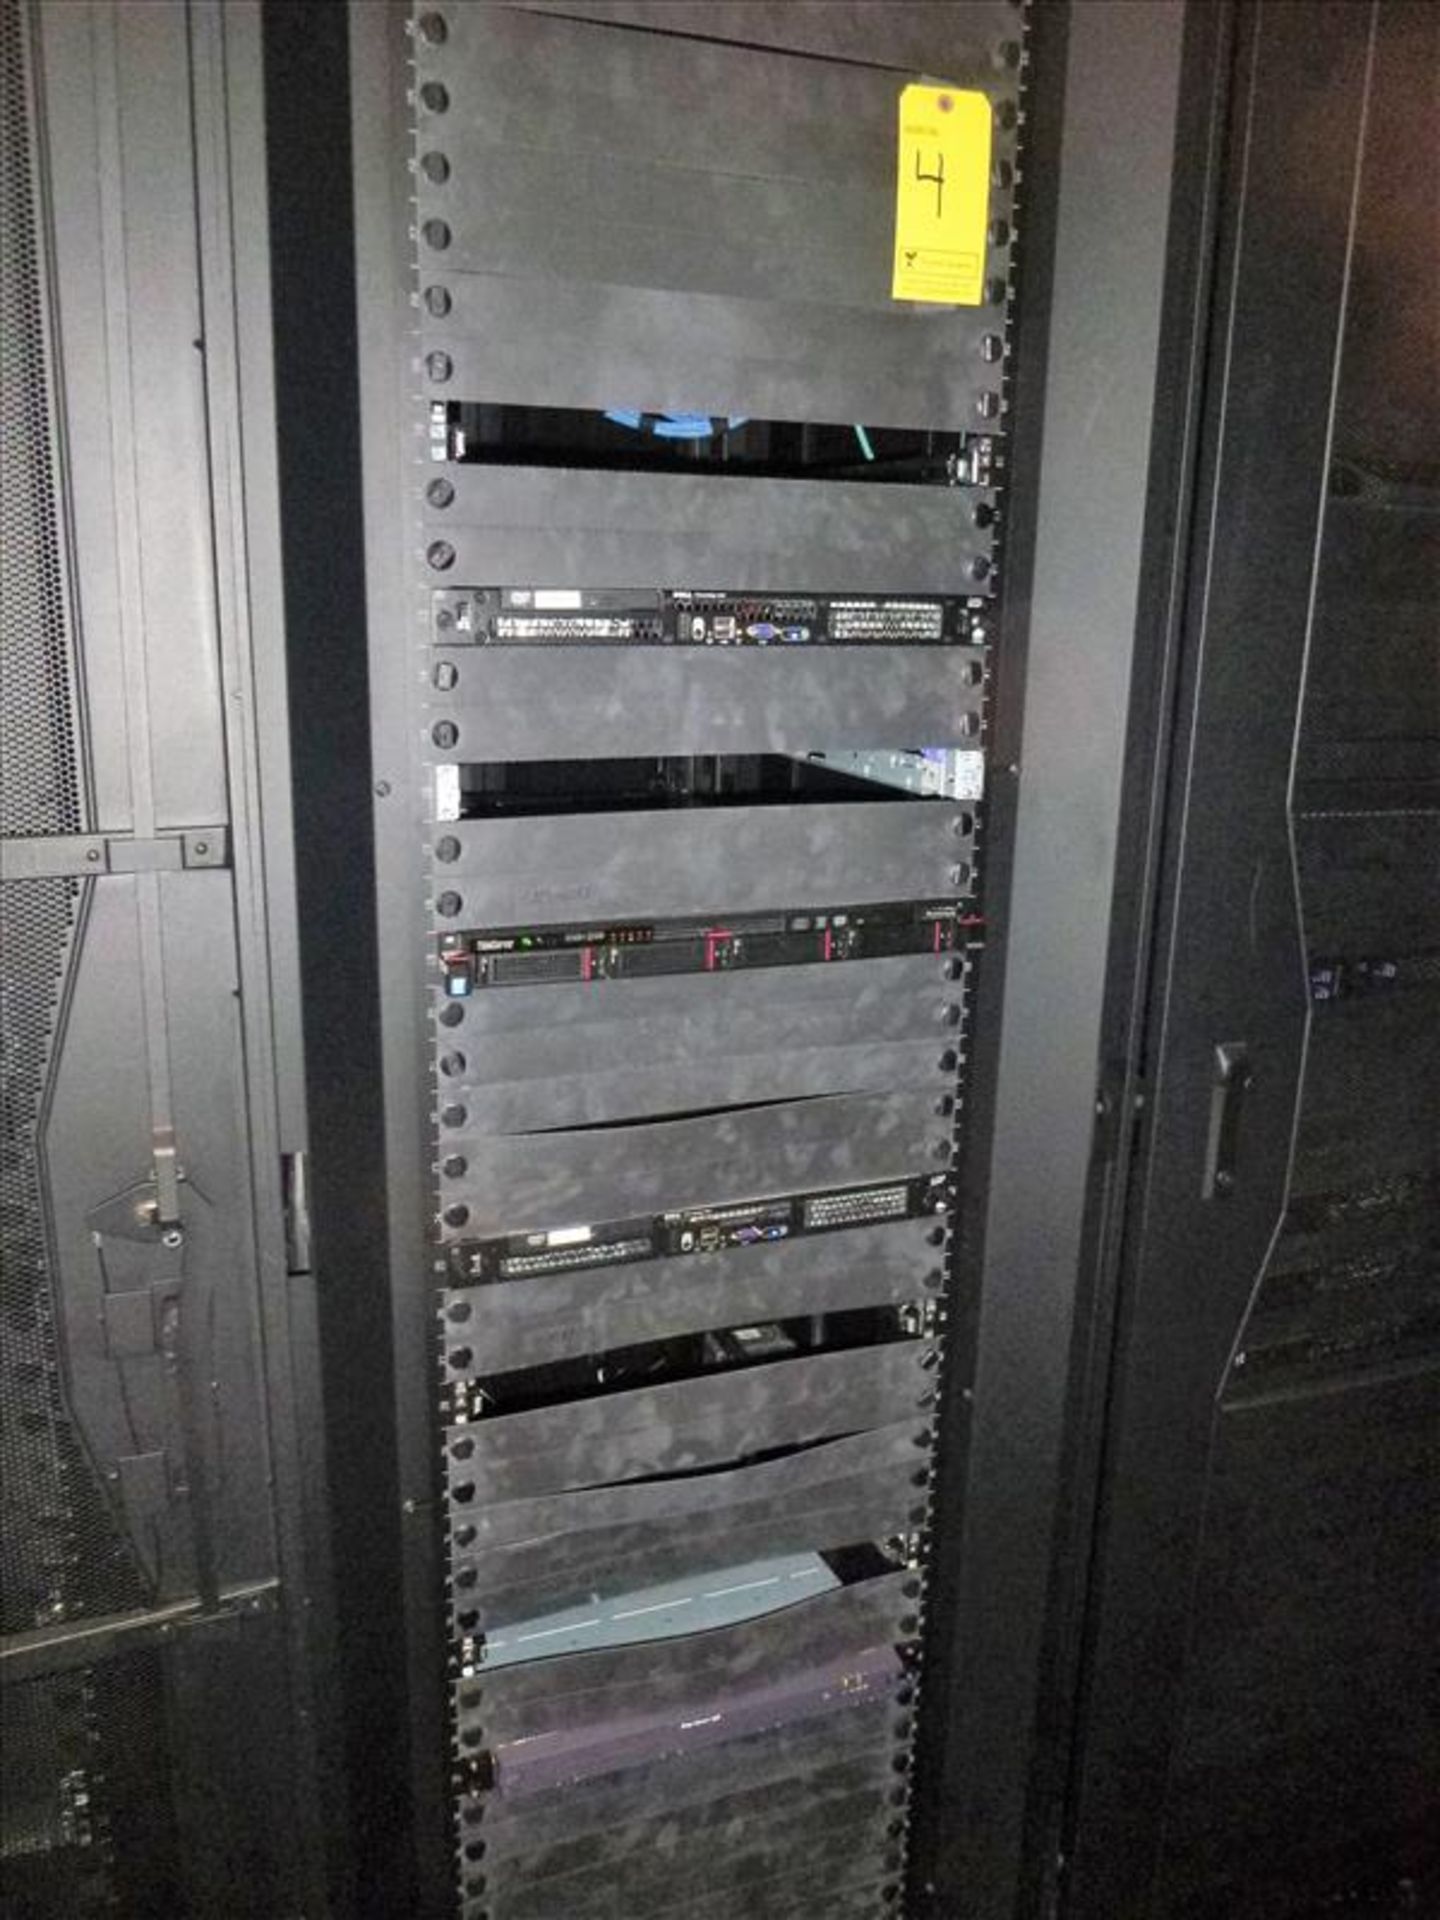 Panduit server cabinet (all cable excluded) (R1C4) incl.; - Dell PowerEdge 860 server - Lenova Think